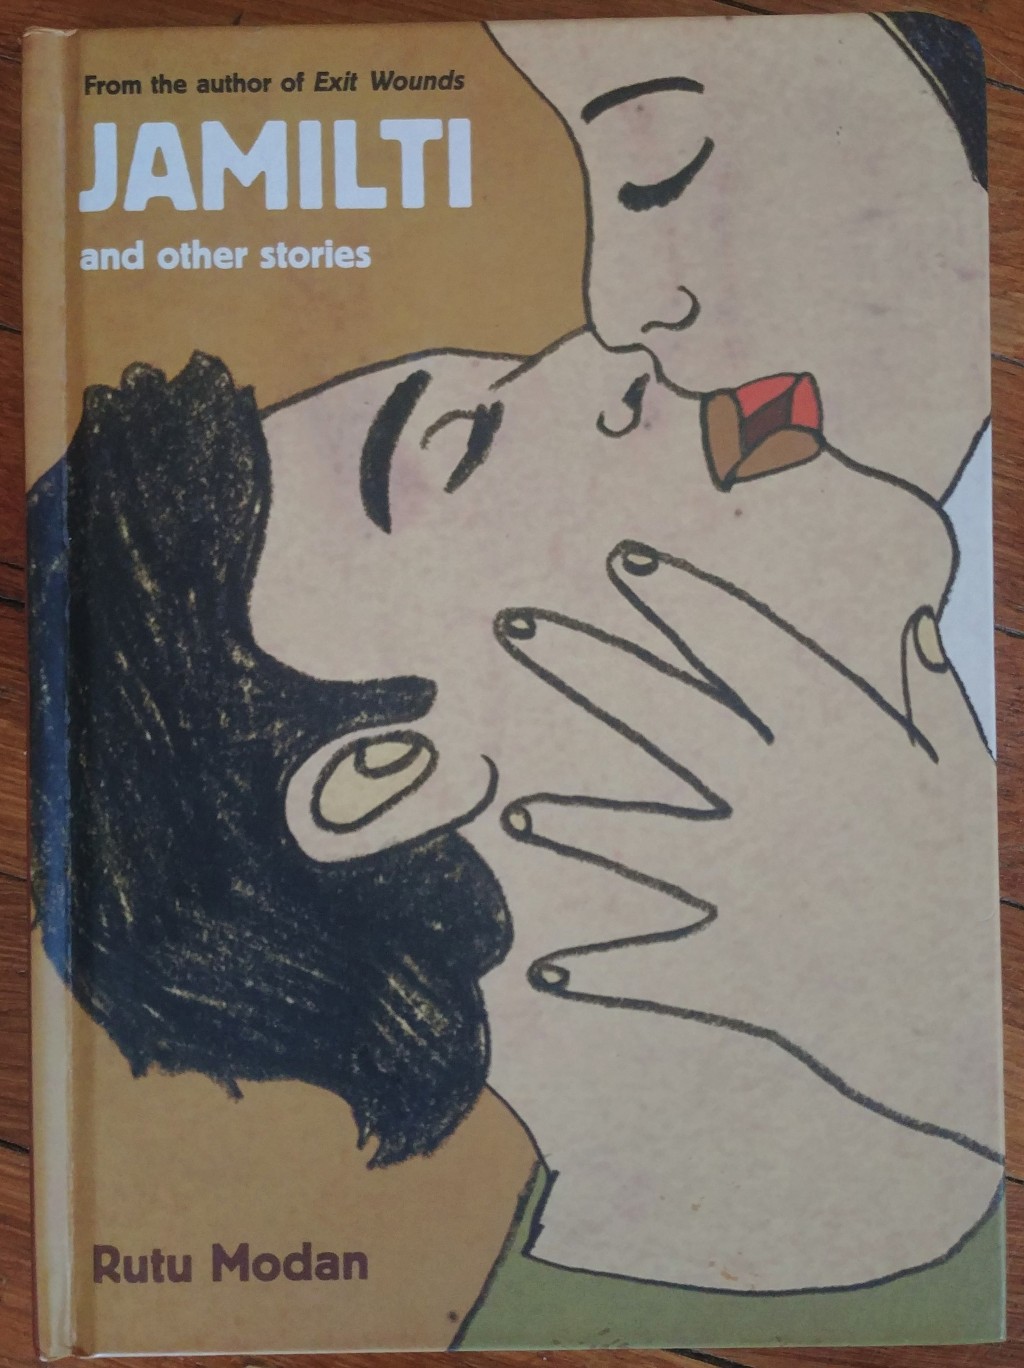 Review of Jamiliti and Other Stories by Rutu Modan